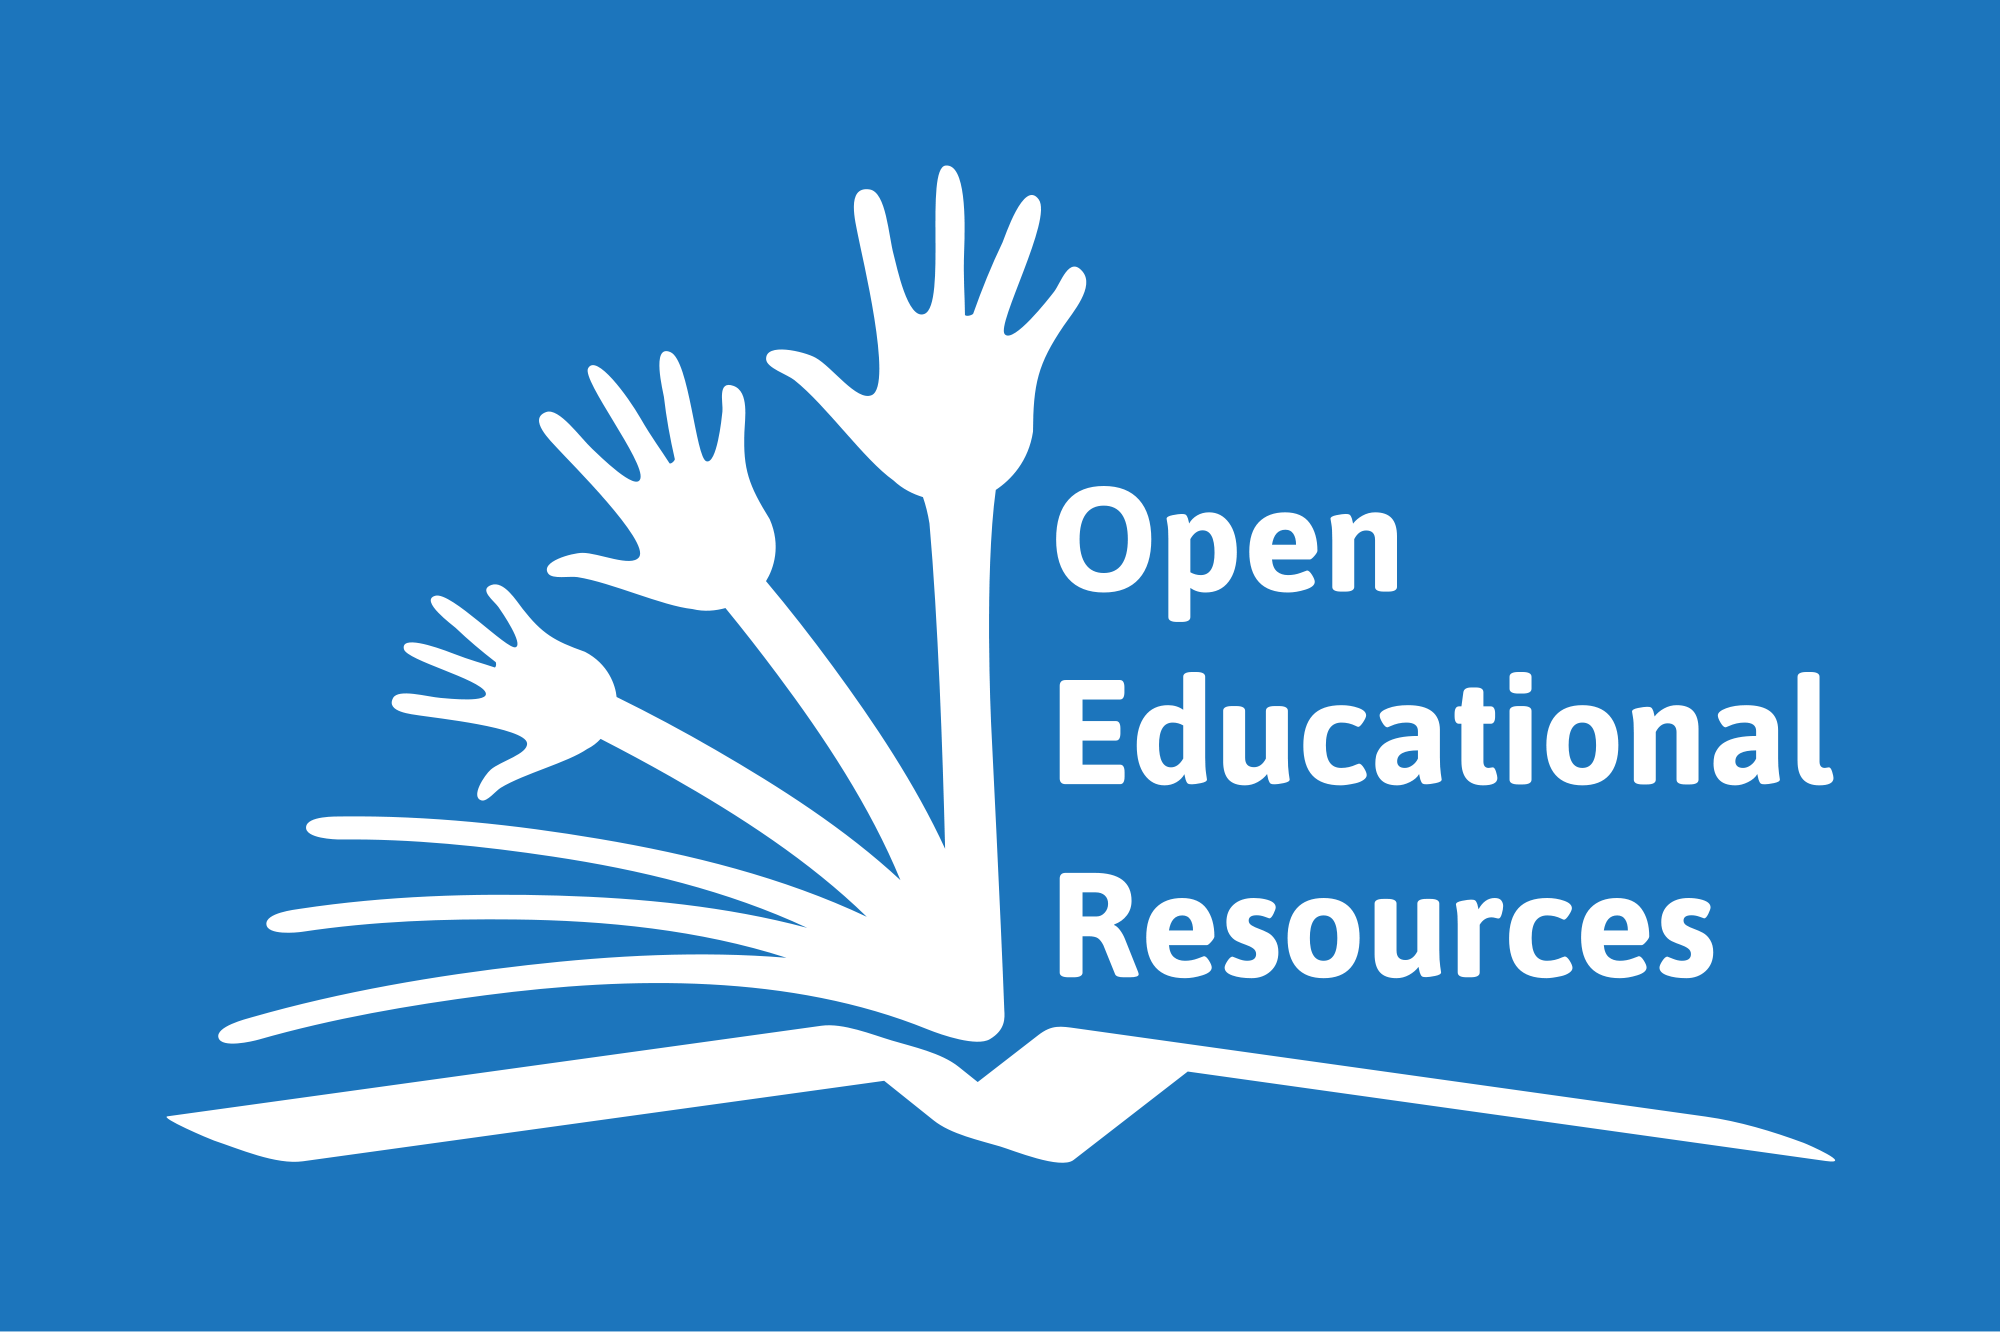 Resources Logo - File:Global Open Educational Resources Logo.svg - Wikimedia Commons